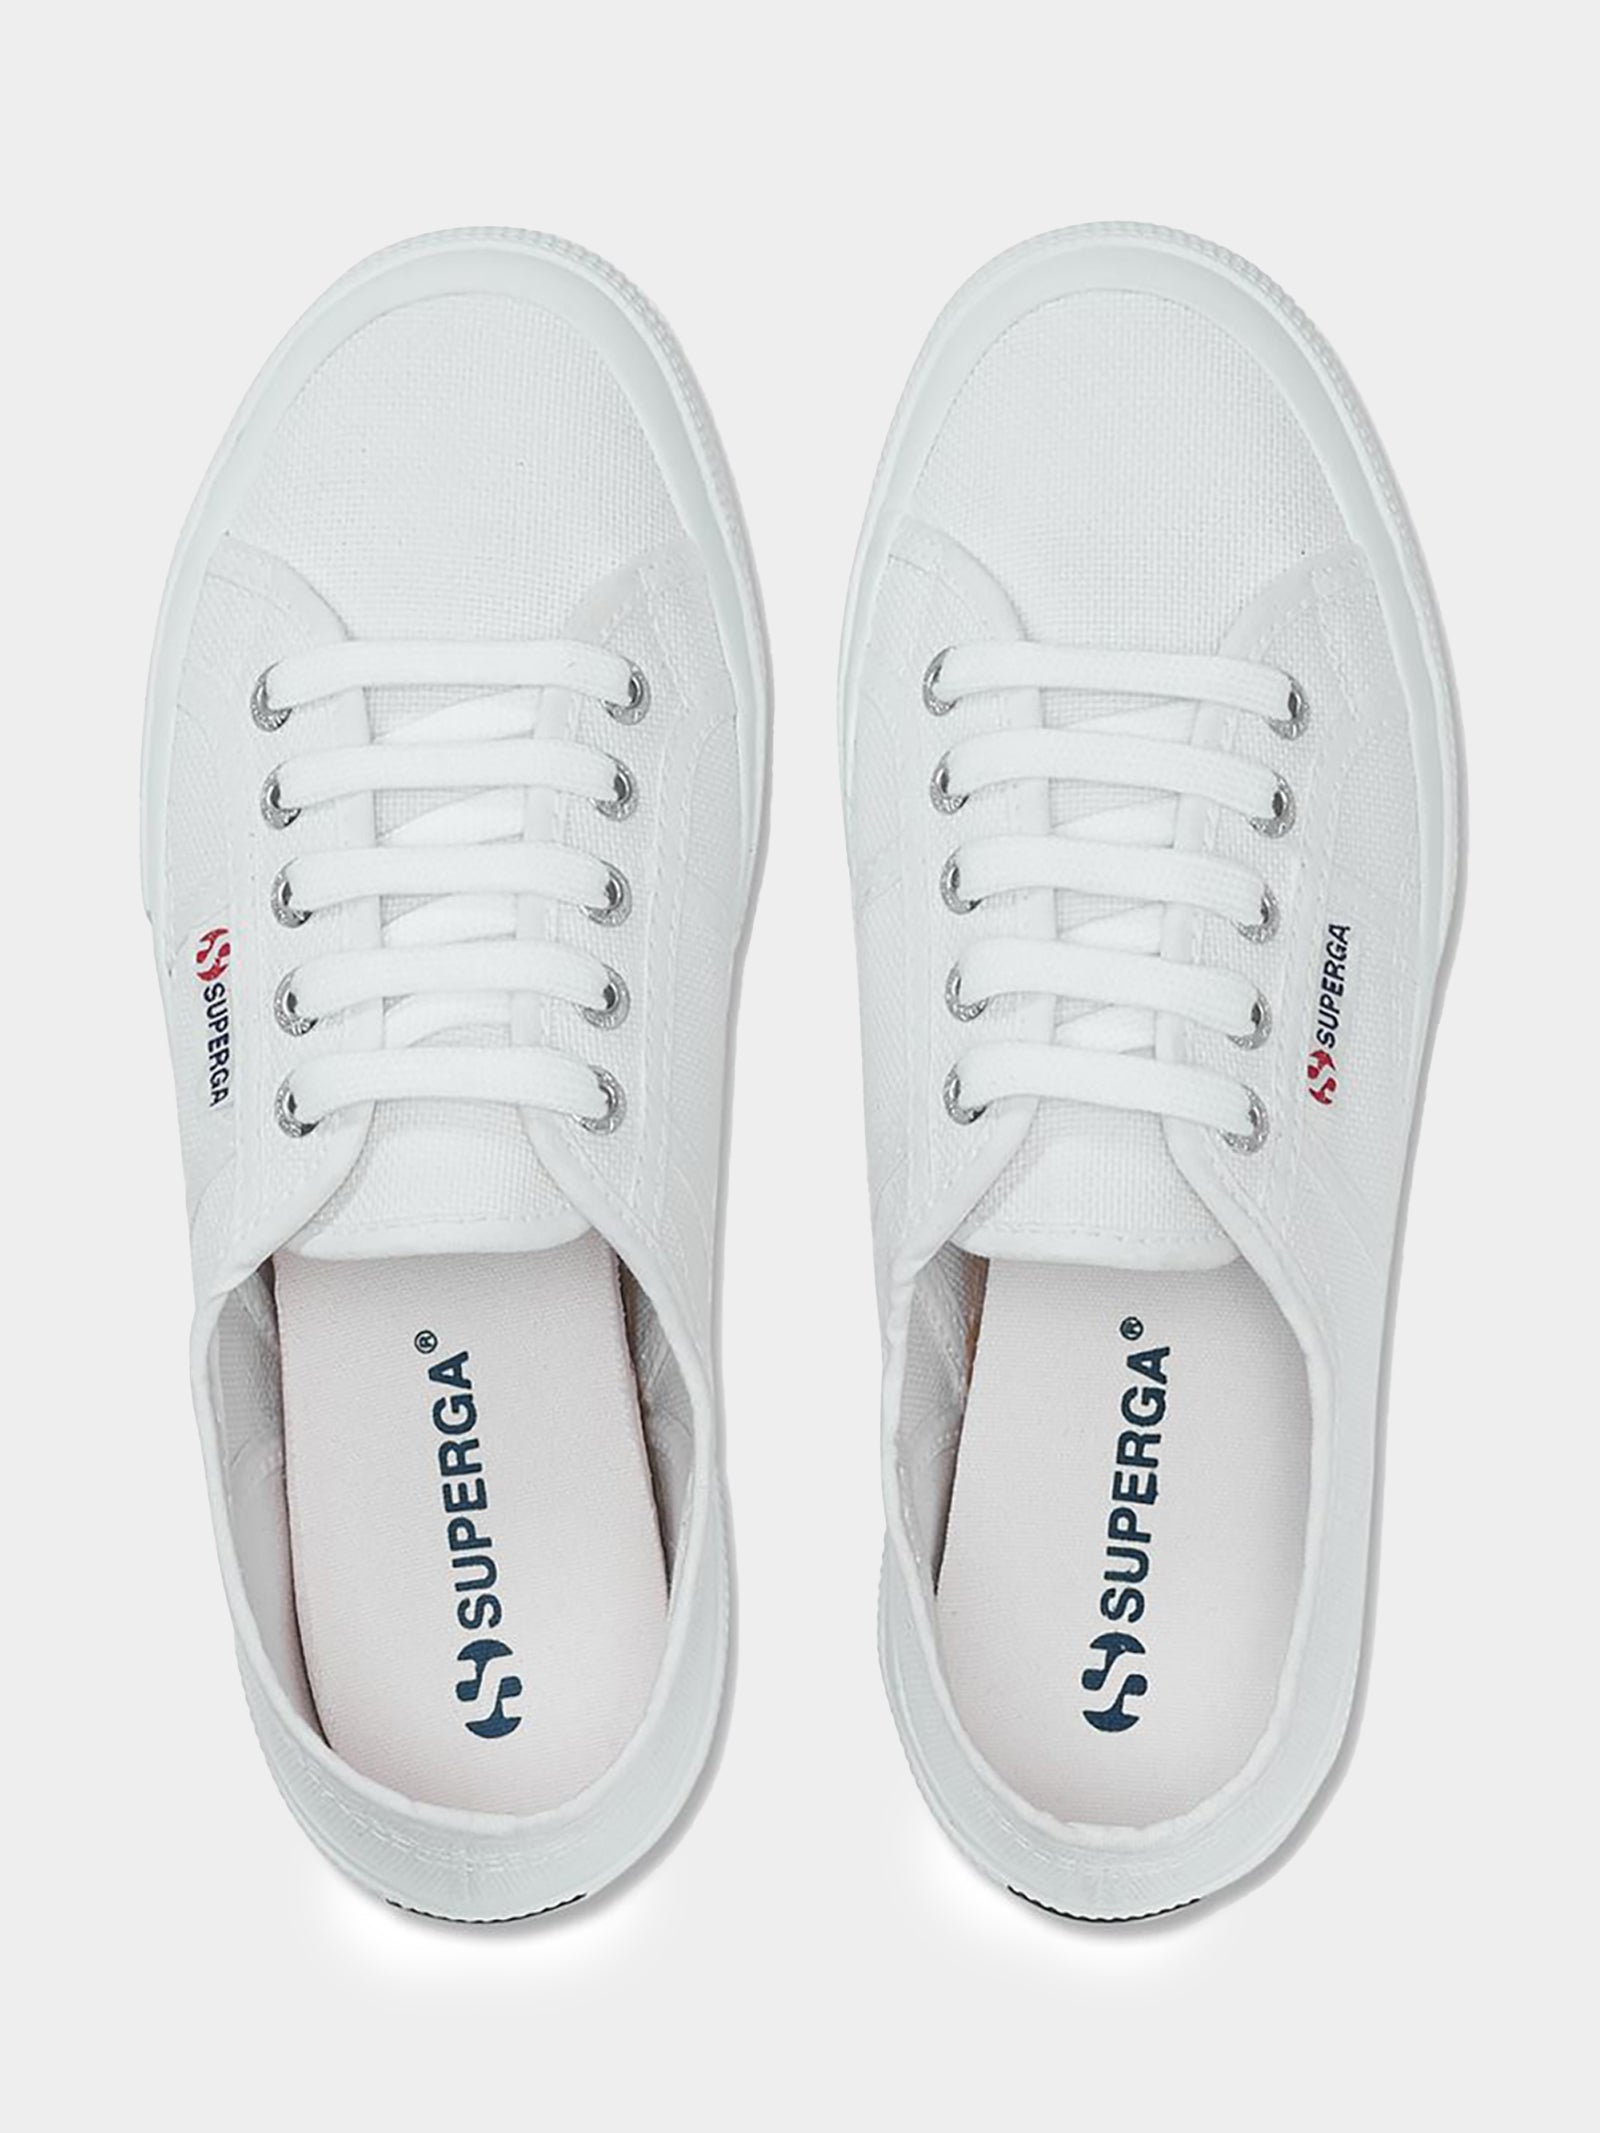 Superga - The Classic Platform Jute Rope Sneaker in White – Shoes 'N' More